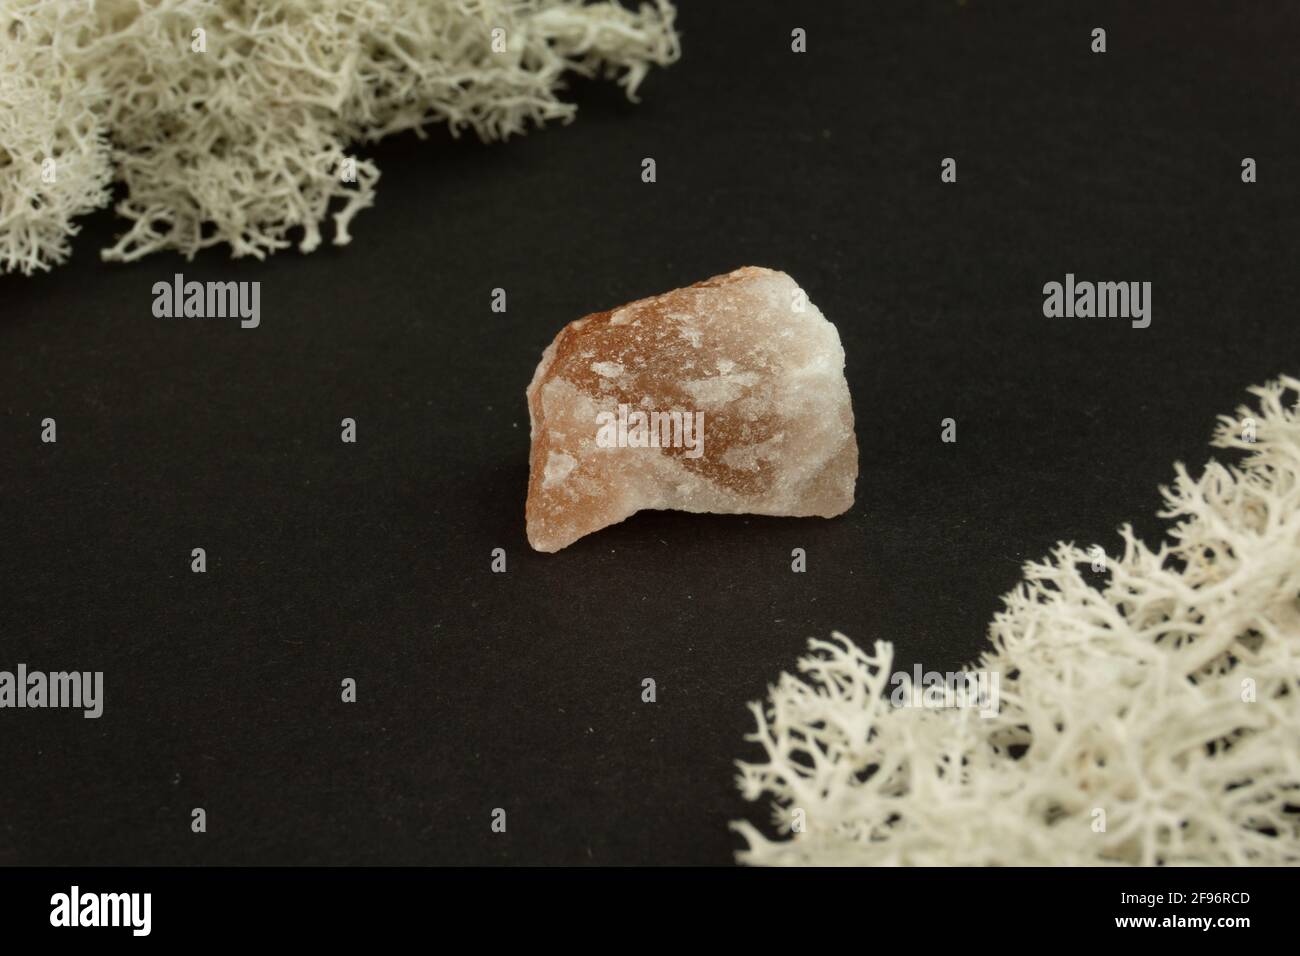 Halite or rock salt from Pakistan. Natural mineral stone on a black background surrounded by moss. Mineralogy, geology, magic, semi-precious stones Stock Photo